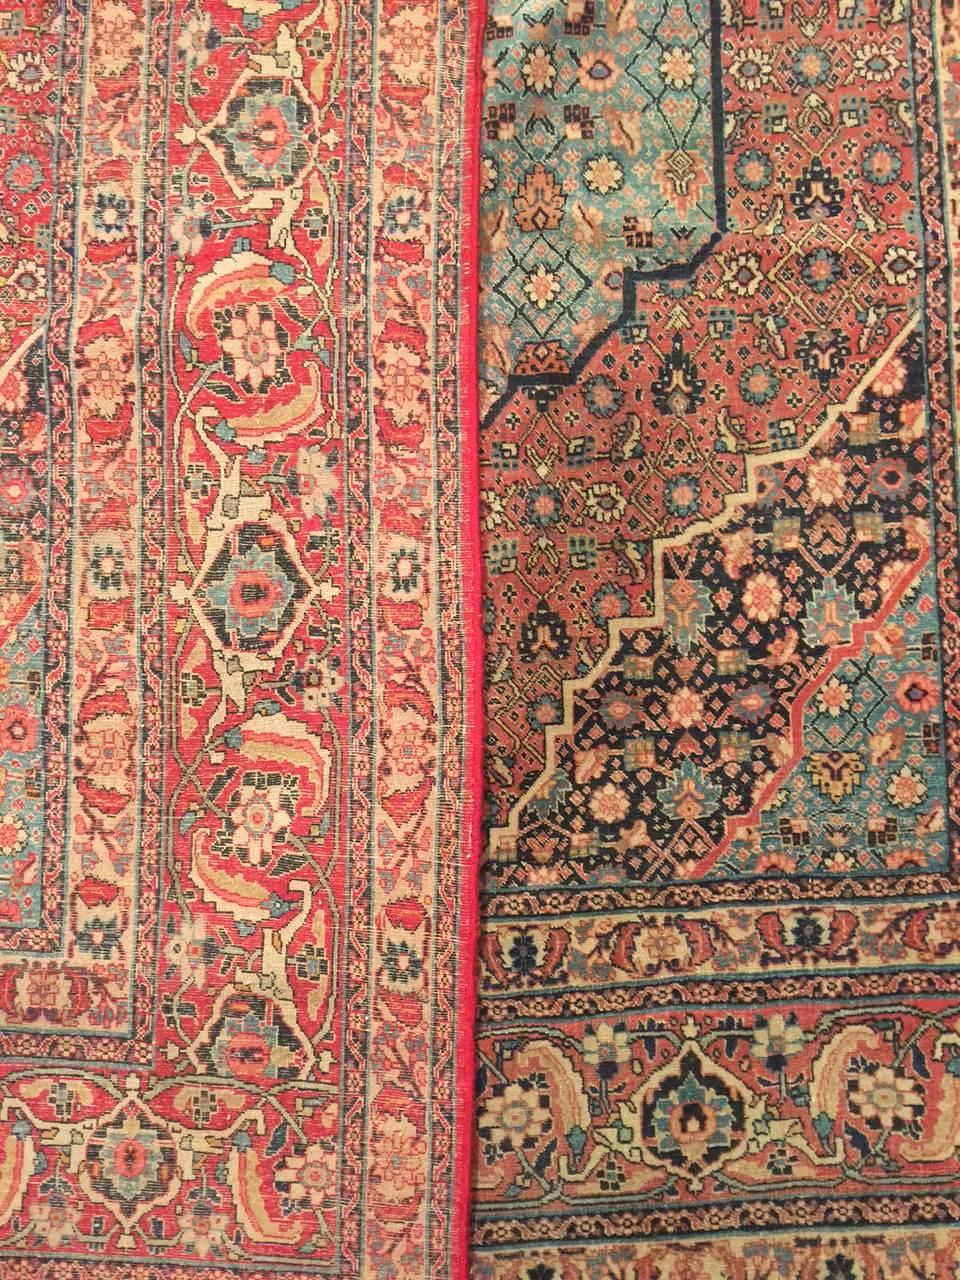 Antique Persian rust Tabriz rug, circa 1870. Tabriz is the capital of the north-western province of Azerbaijan in Northwest Persia and for centuries has enjoyed a great reputation as a centre of Oriental culture. Arguable the finest weaves or